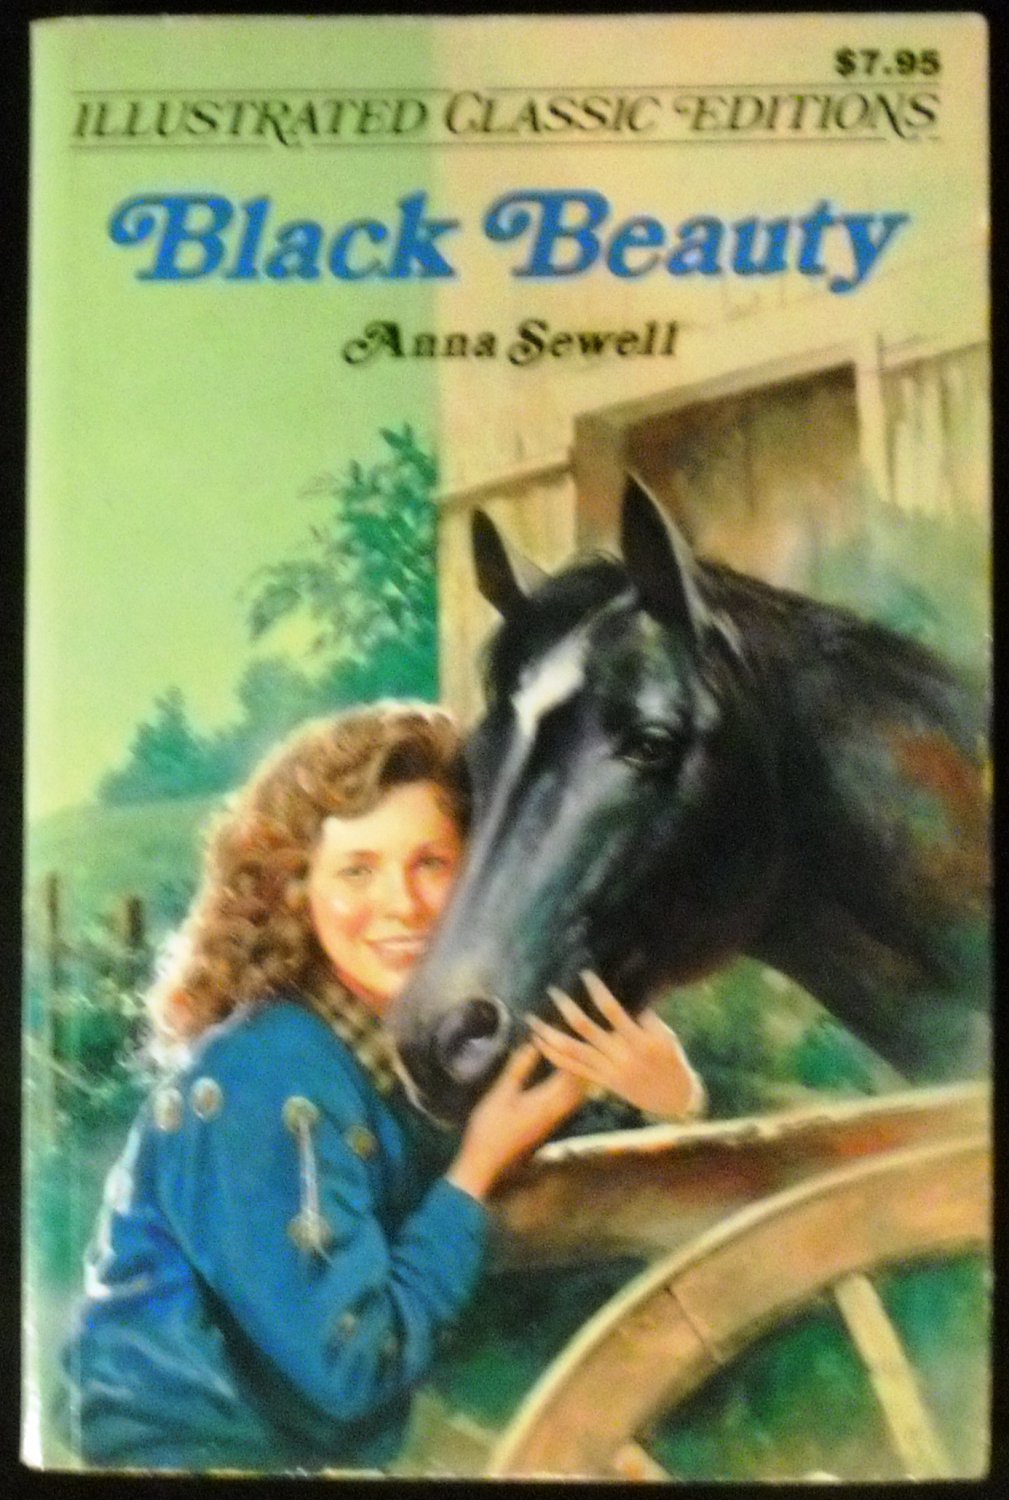 Black Beauty Illustrated Classic Editions Paperback Anna Sewell